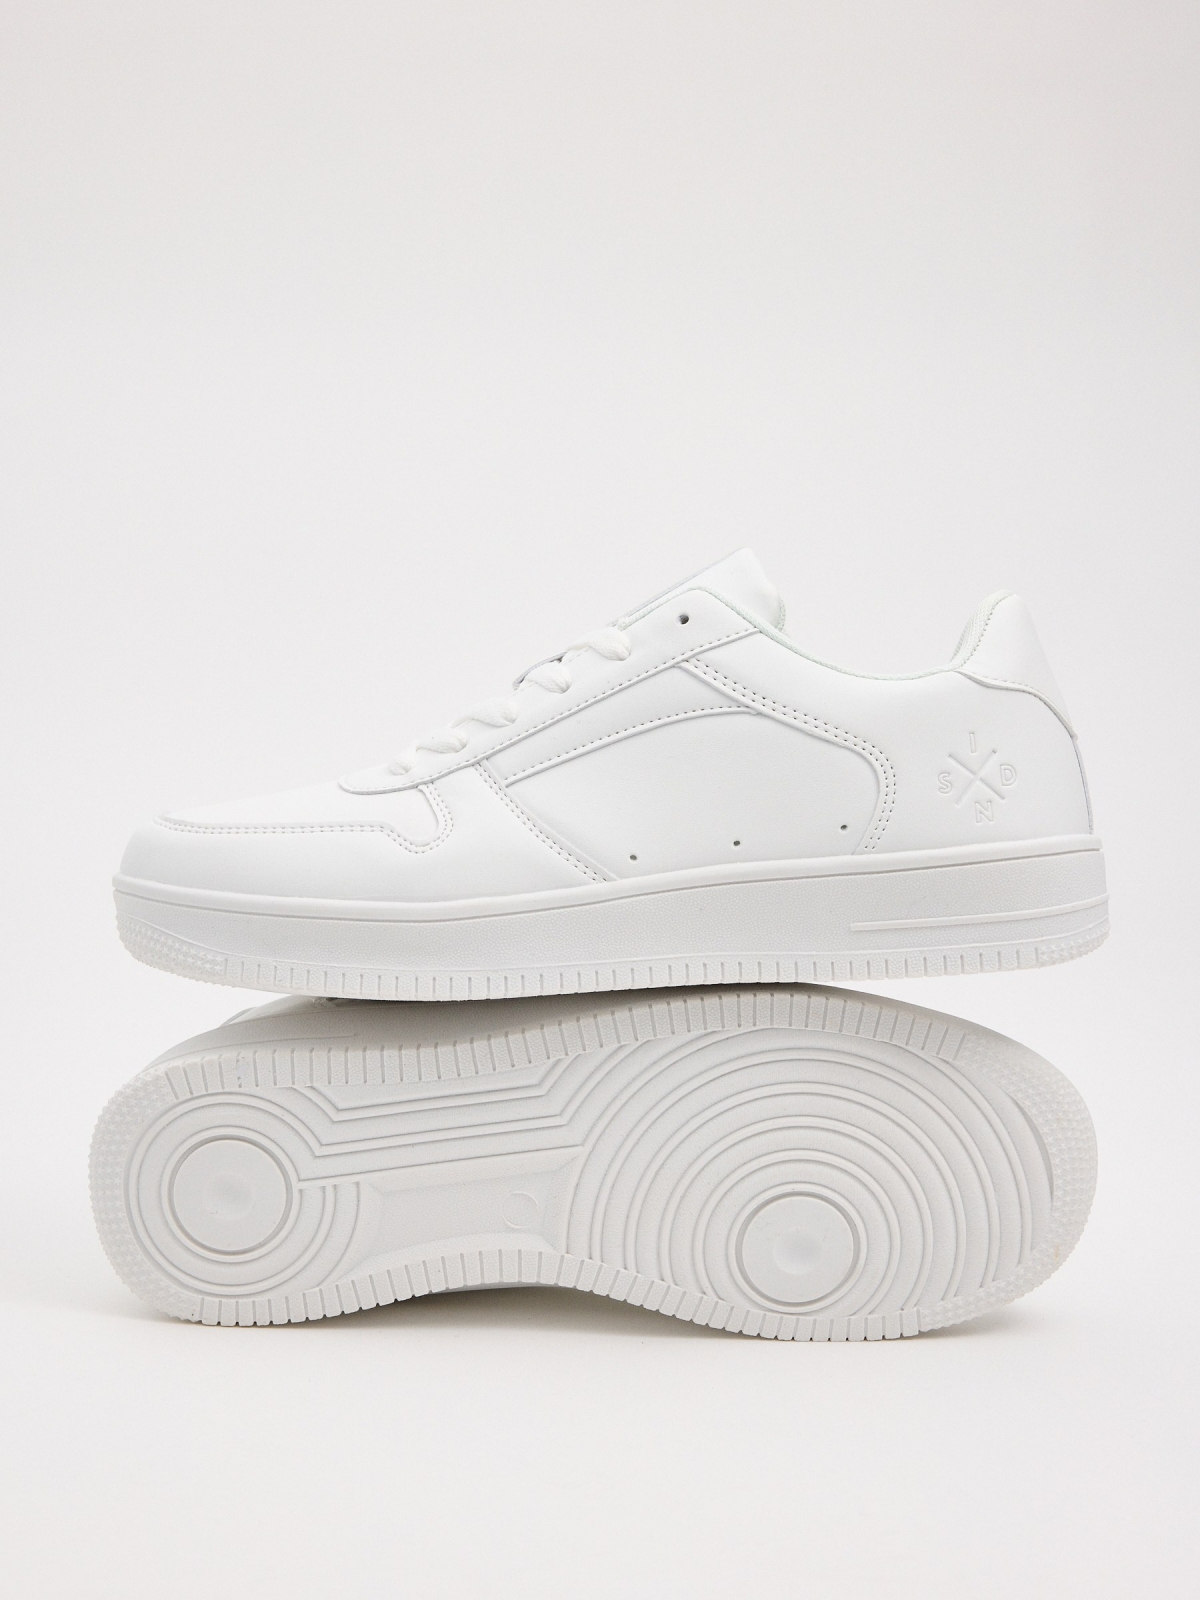 Basic casual combined sneaker white detail view